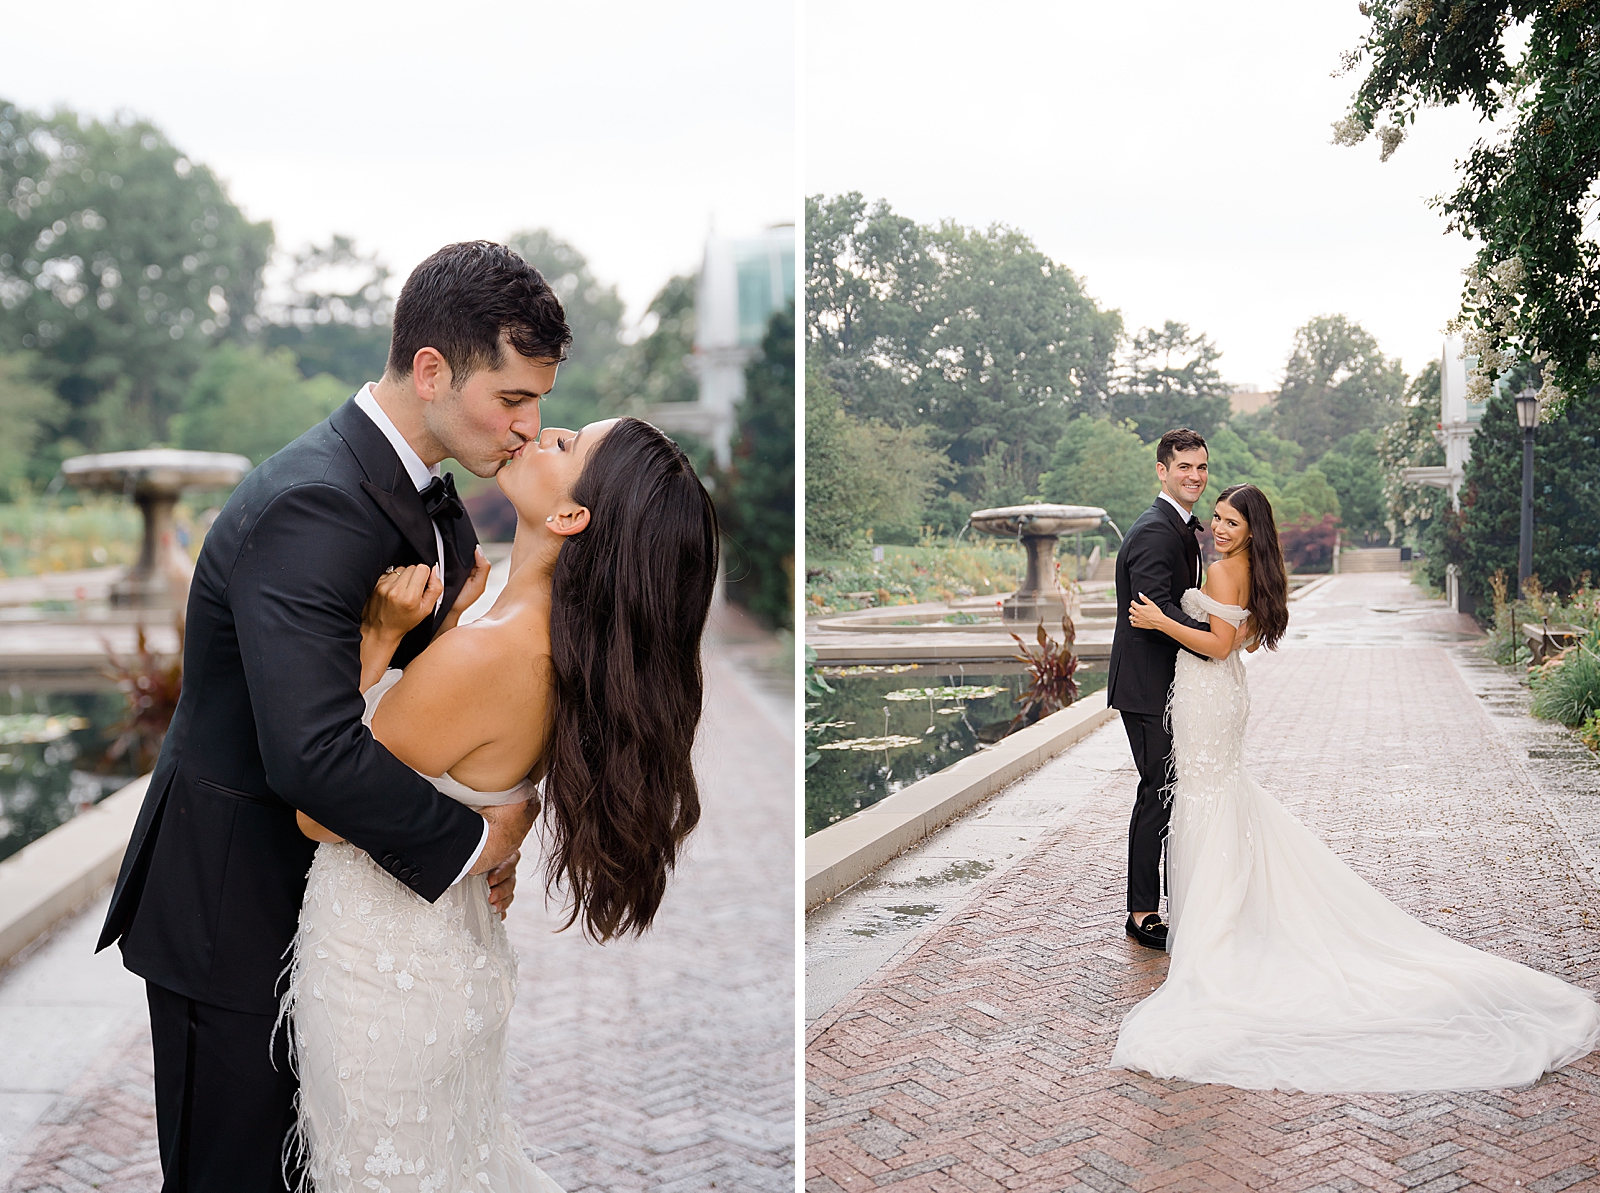 Left photo: The bride and groom share a kiss in front of a pond and fountain.
Right photo: Full body shot of the bride and groom embracing in front of a pond and fountain.